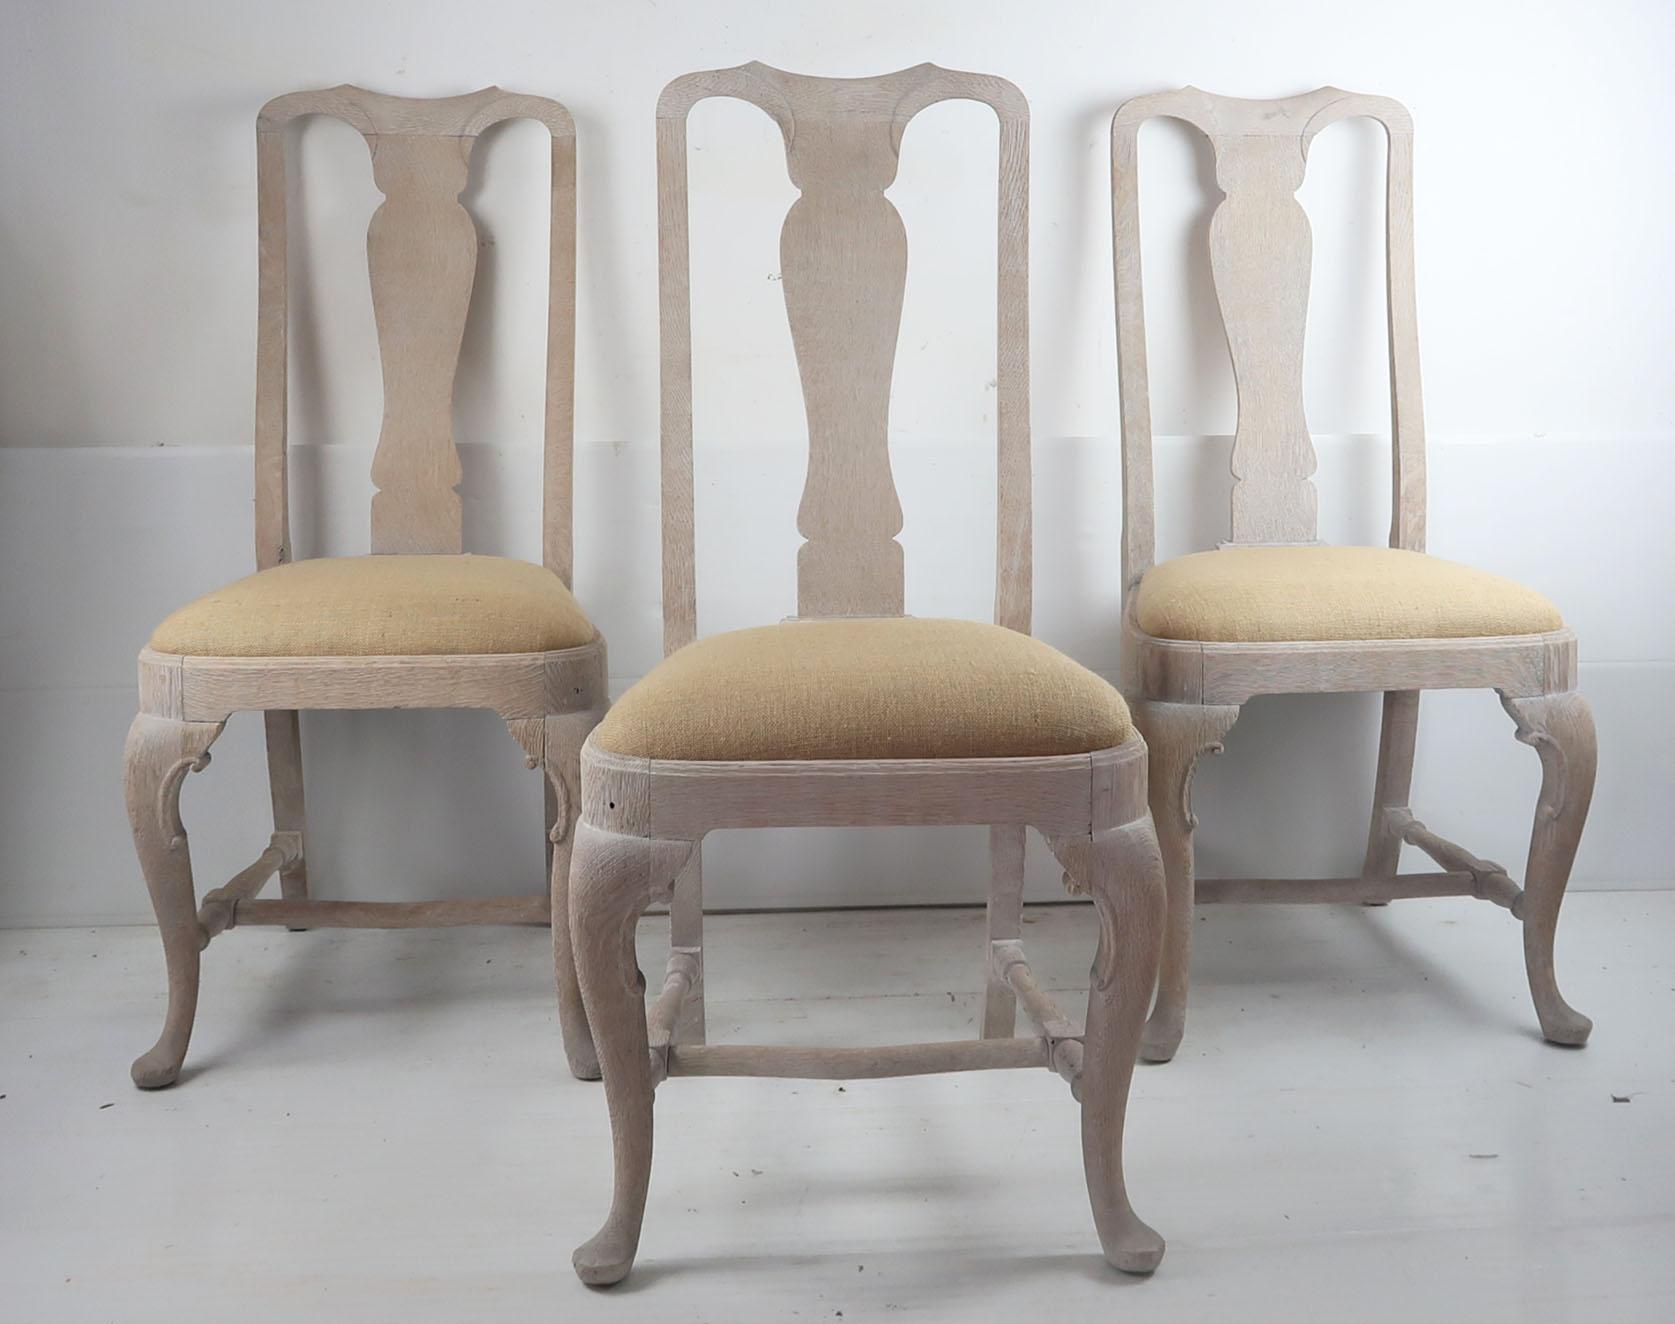 A super matching set of 6 dining chairs

They are continental, probably French.

Gustavian style with the typical urn back splat, nicely carved cabriole leg and the os de mouton shaped stretcher

They have been recently limed to give a